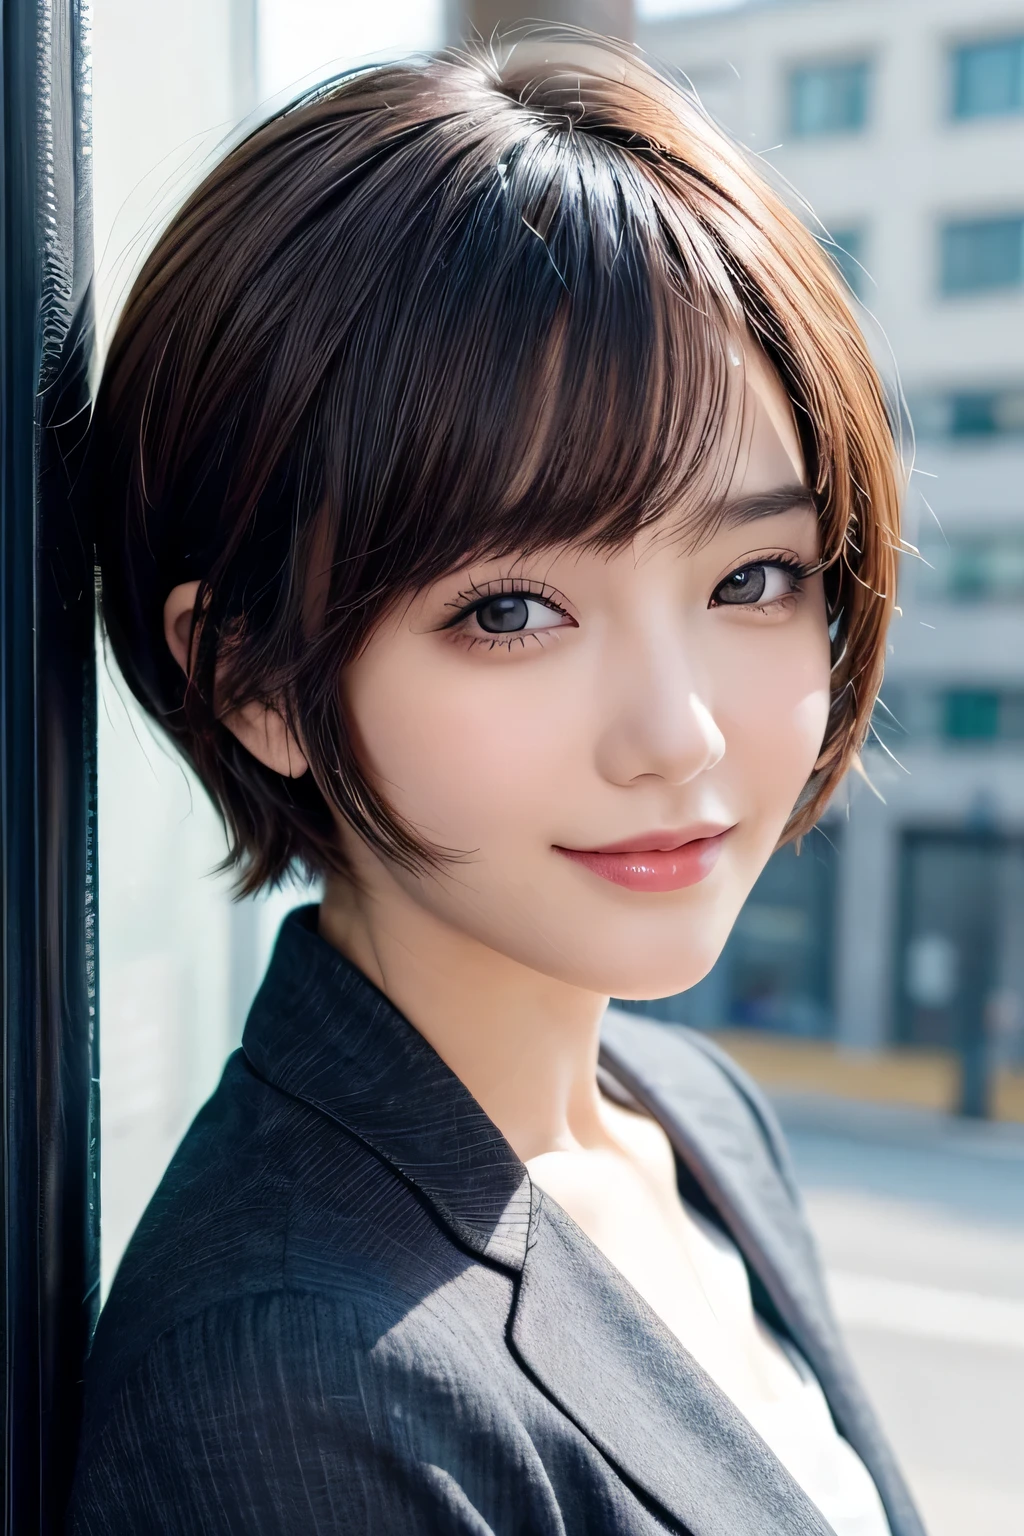 Frontal close-up of calm and wise short-haired young beauty in professional dress smiling and gazing at you. Simple office in the background.

